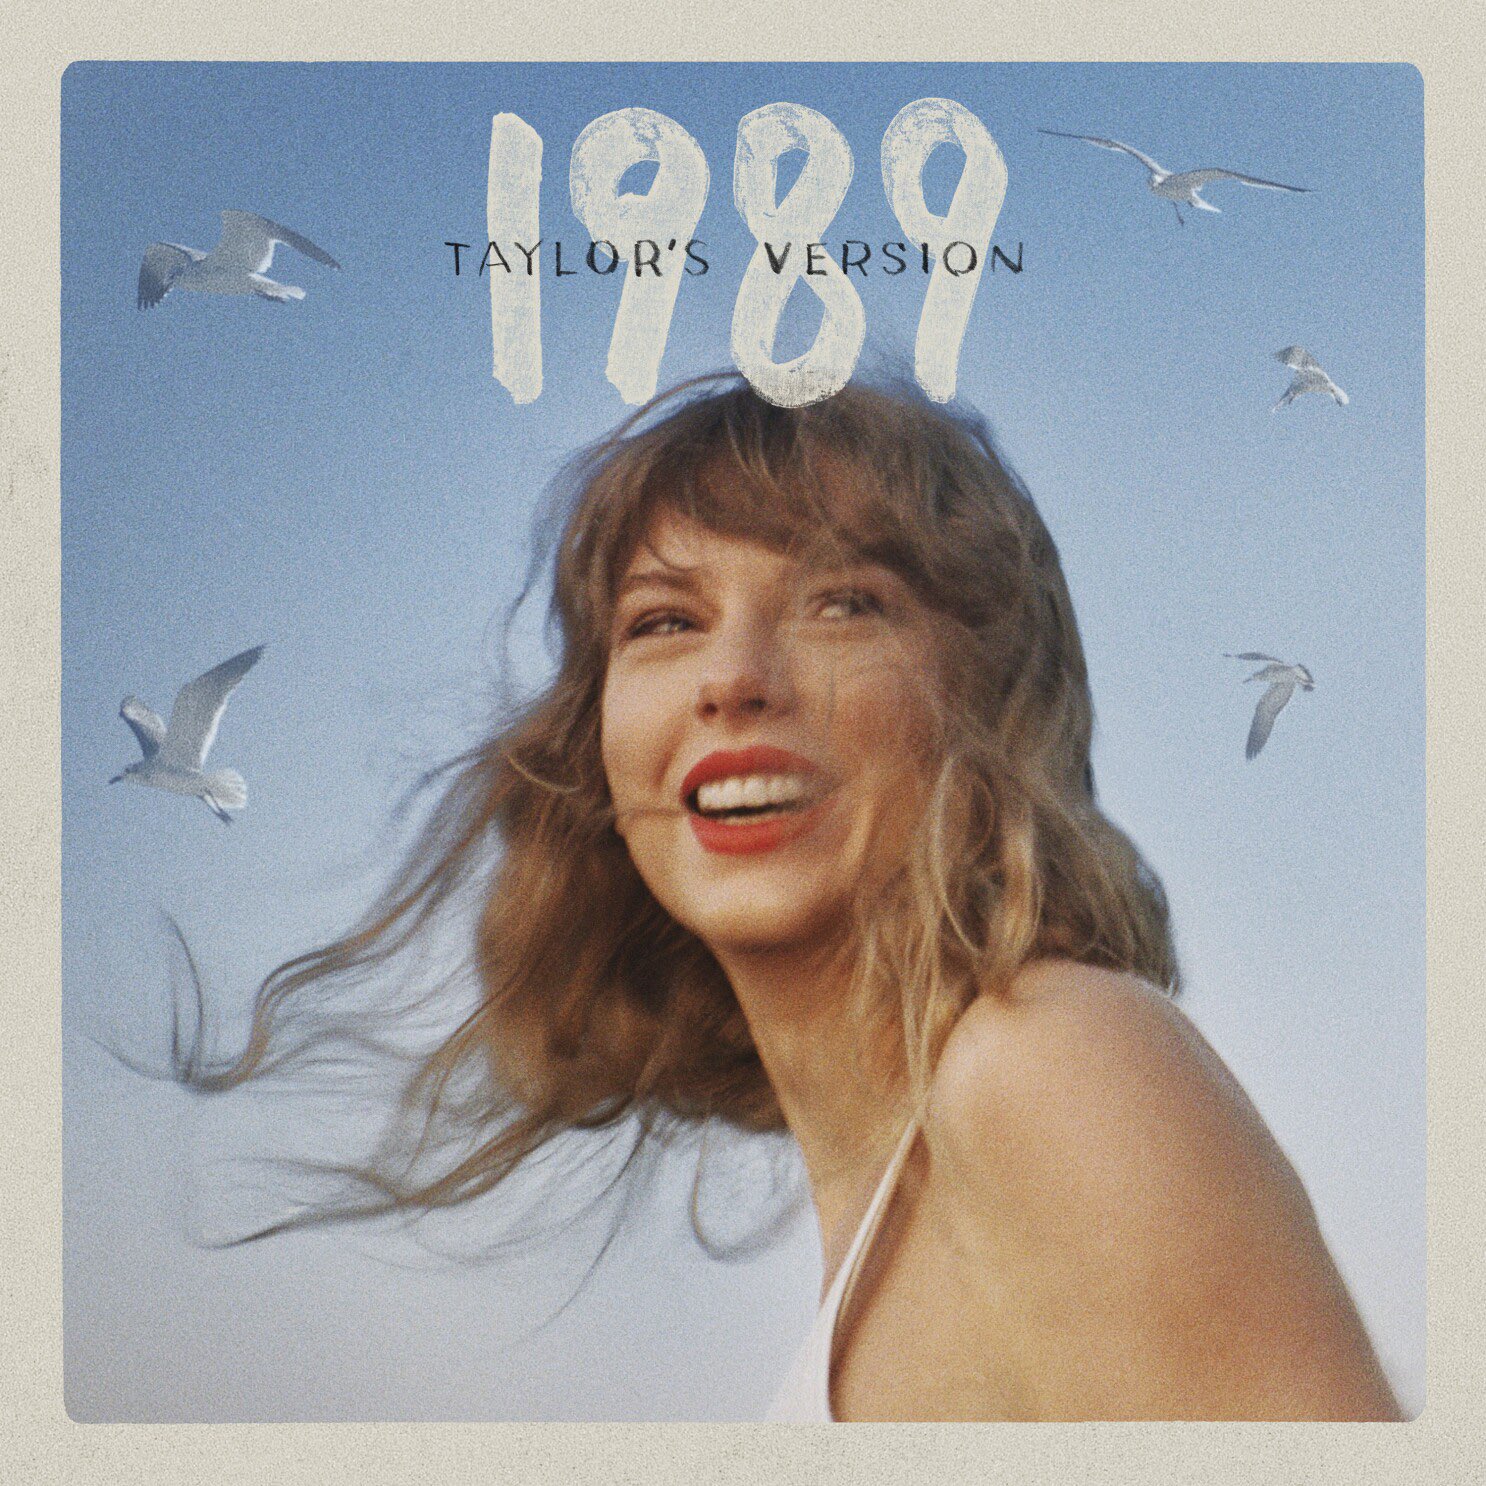 Taylor Swift Now That We Don't Talk (Taylor's Version) (From The